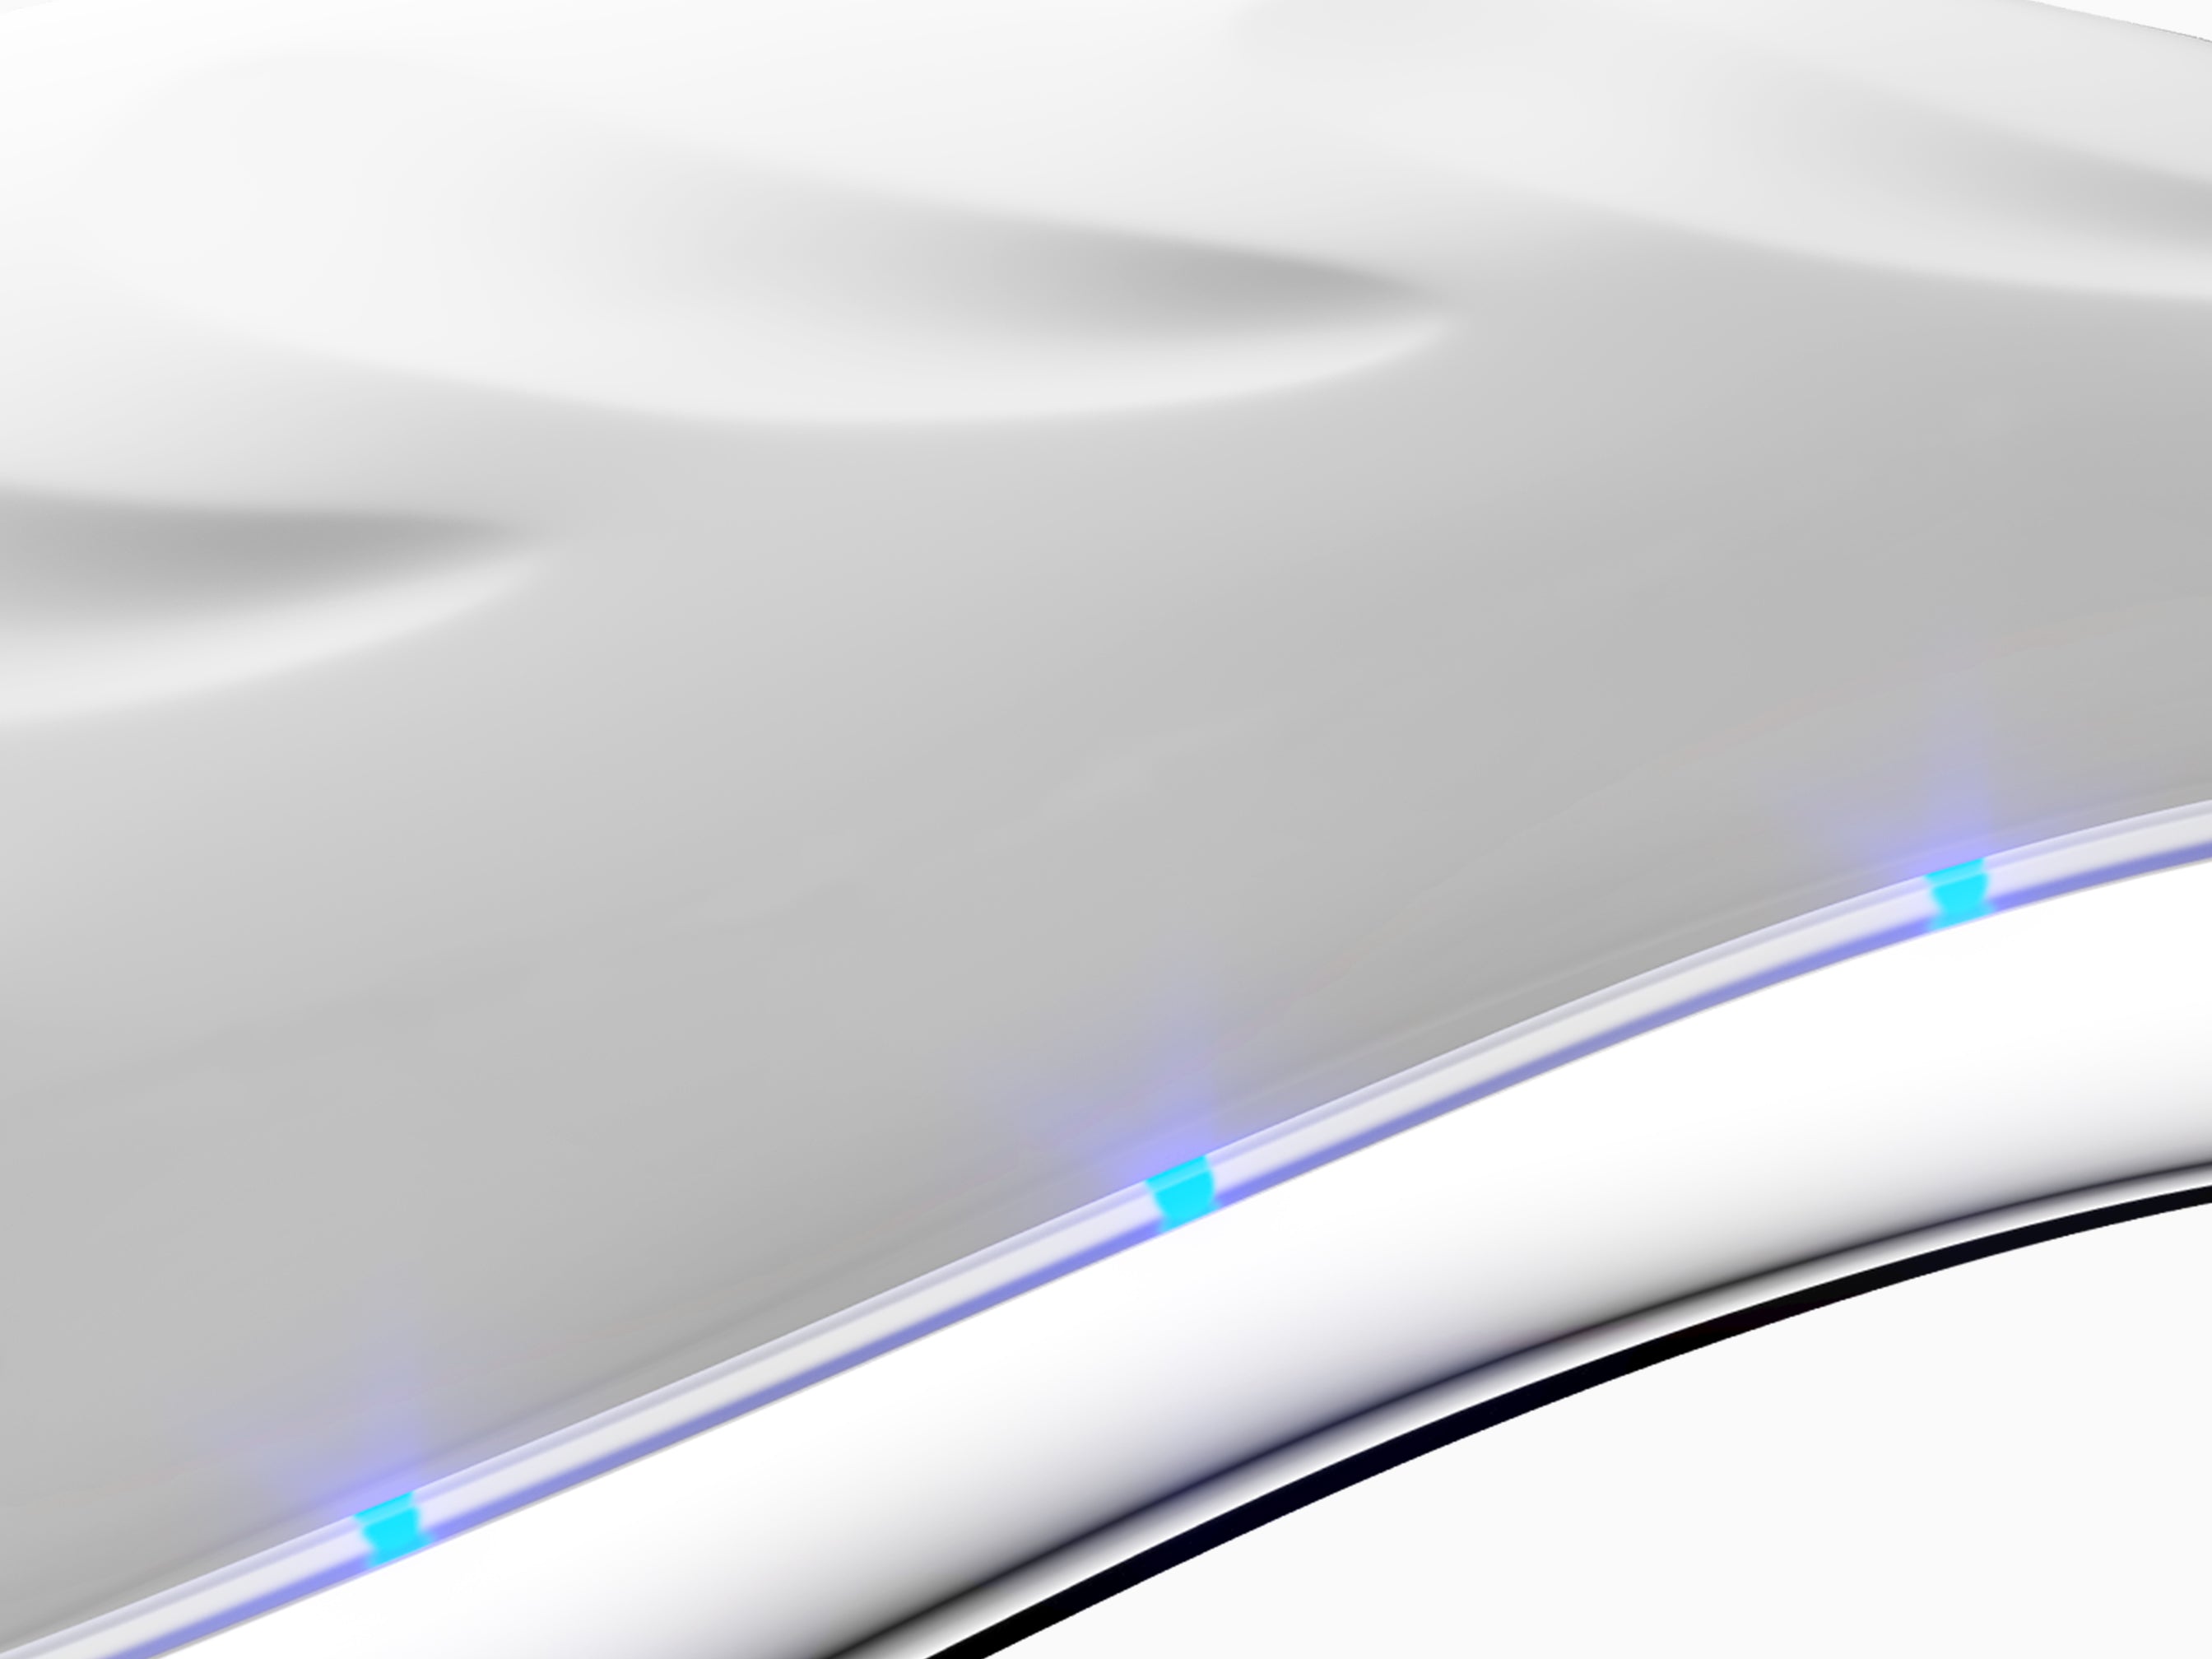 A super close-up of the Redefine with Blue Light Therapy mode activated.